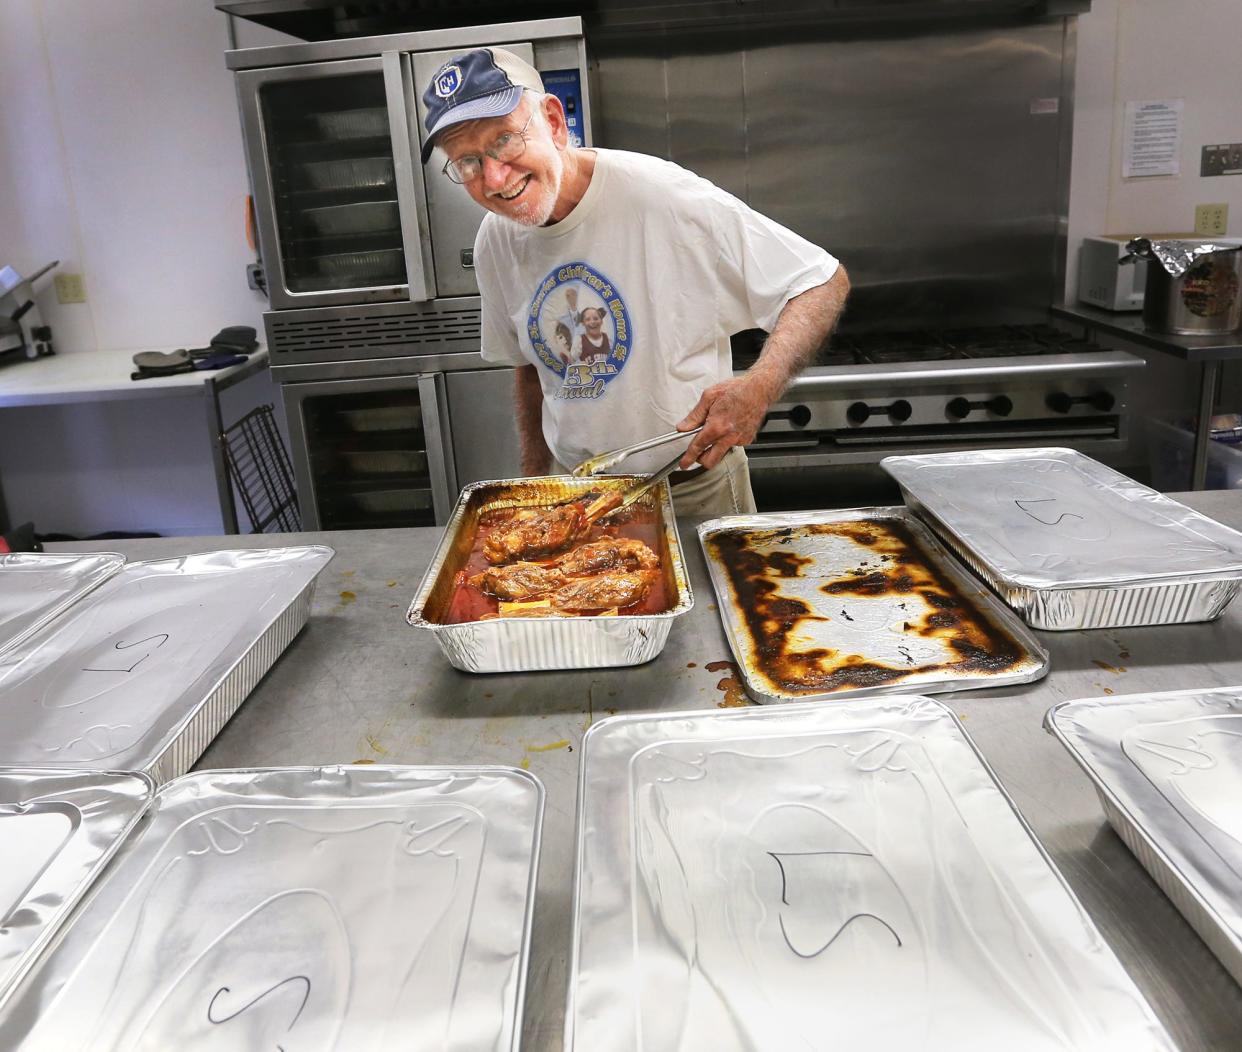 Paul Maskwa has been participating in the Dover Greek Festival for more than 20 years. "We cook 450 pounds of lamb shanks," he says as he turns the meat in a pan Thursday, Sept. 1, 2022. He says the festival will serve 2,500-2,800 people at the Hellenic Center during the Sept. 2-3 event.